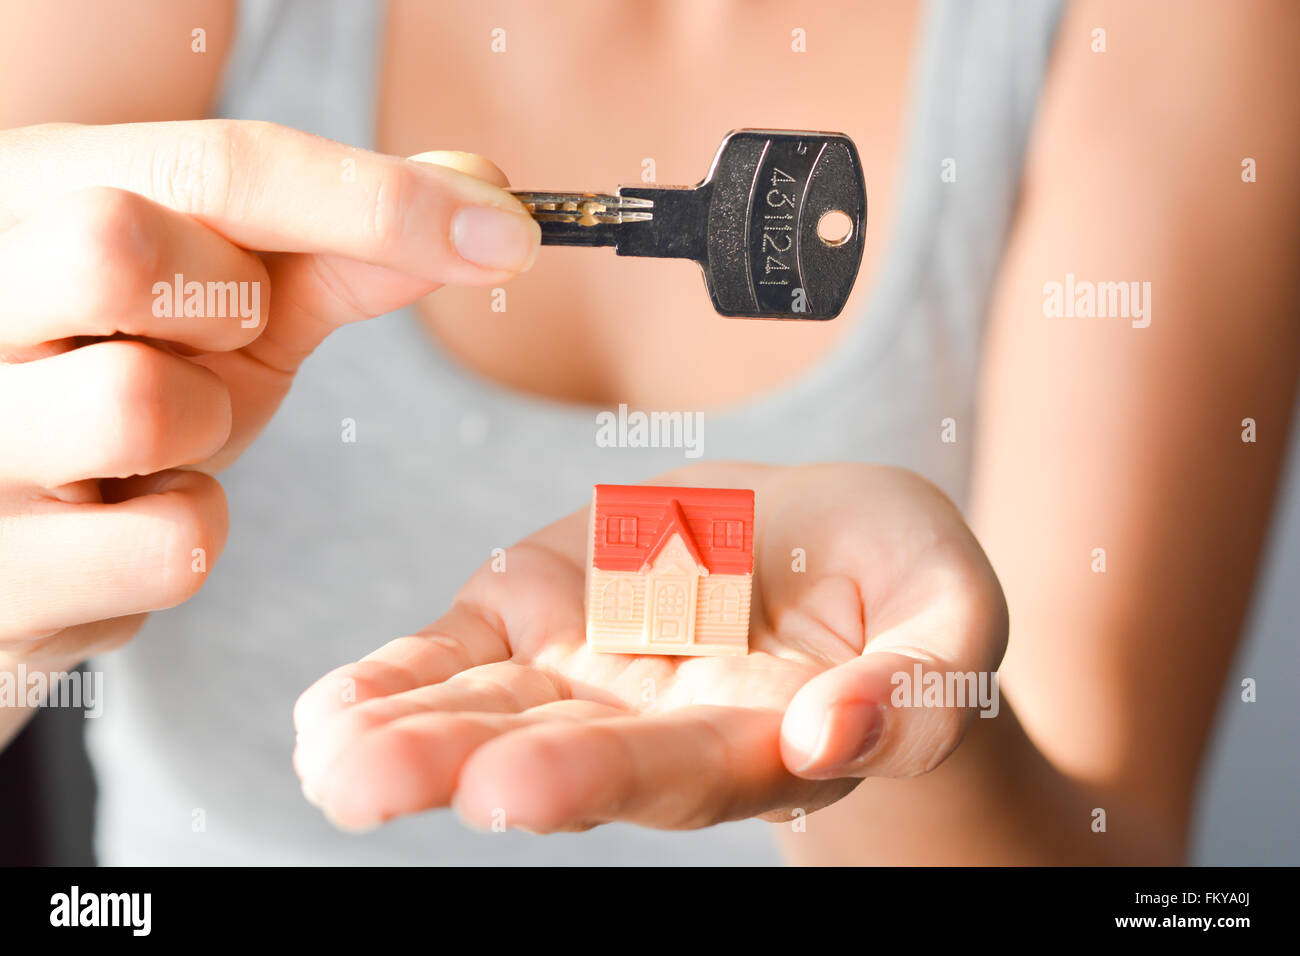 Close-up of woman's hands holding a small model house and a key suggesting house acquisition or rental Stock Photo